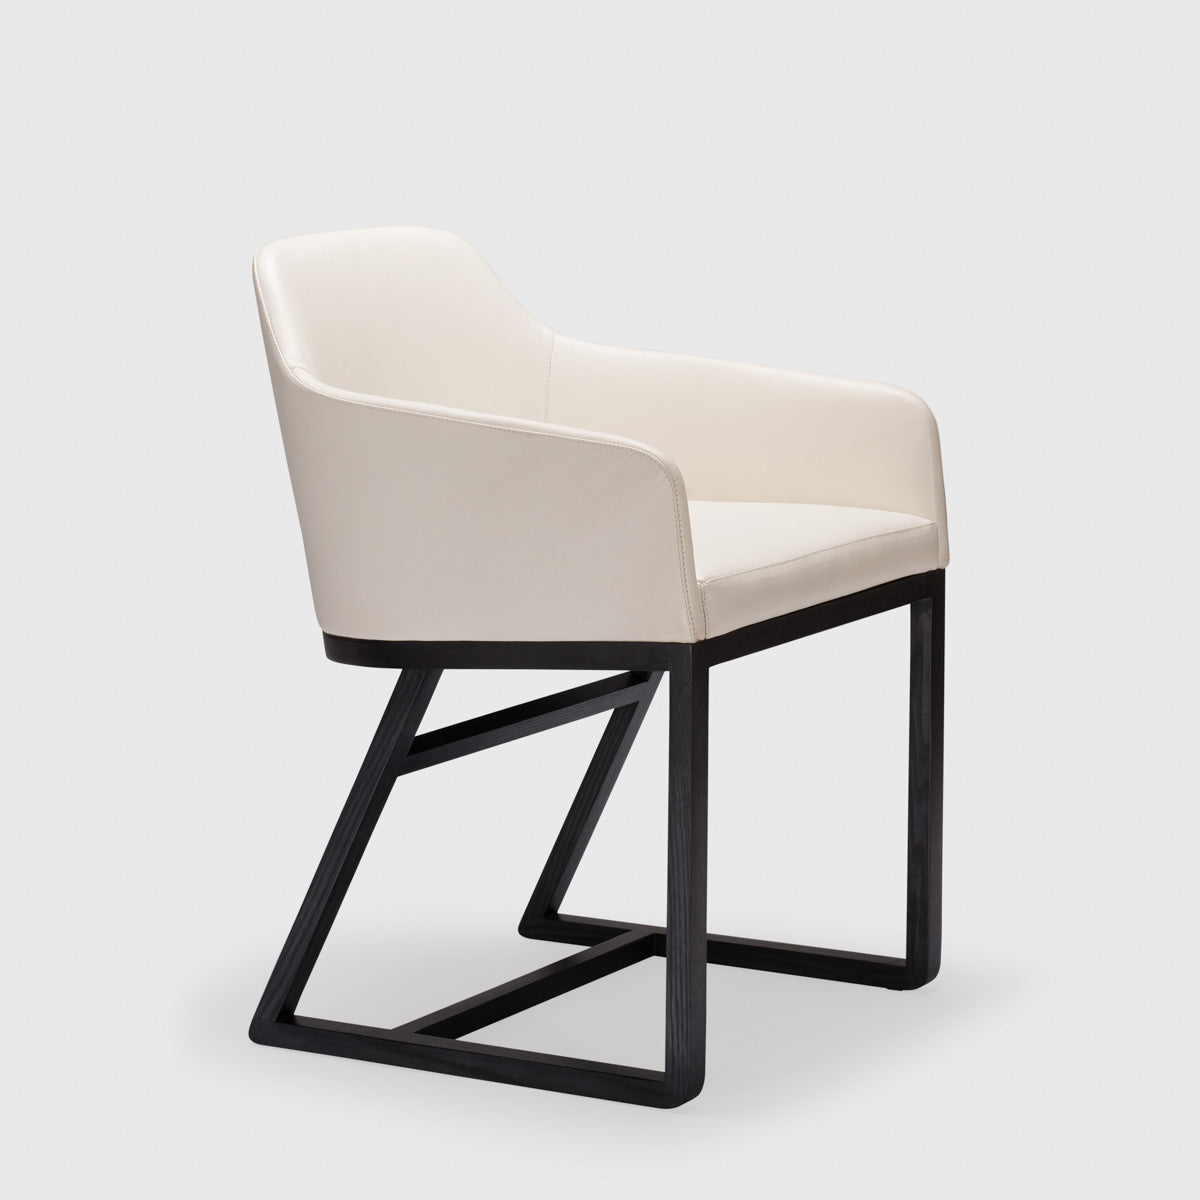 Tofu Carver Dining Chair